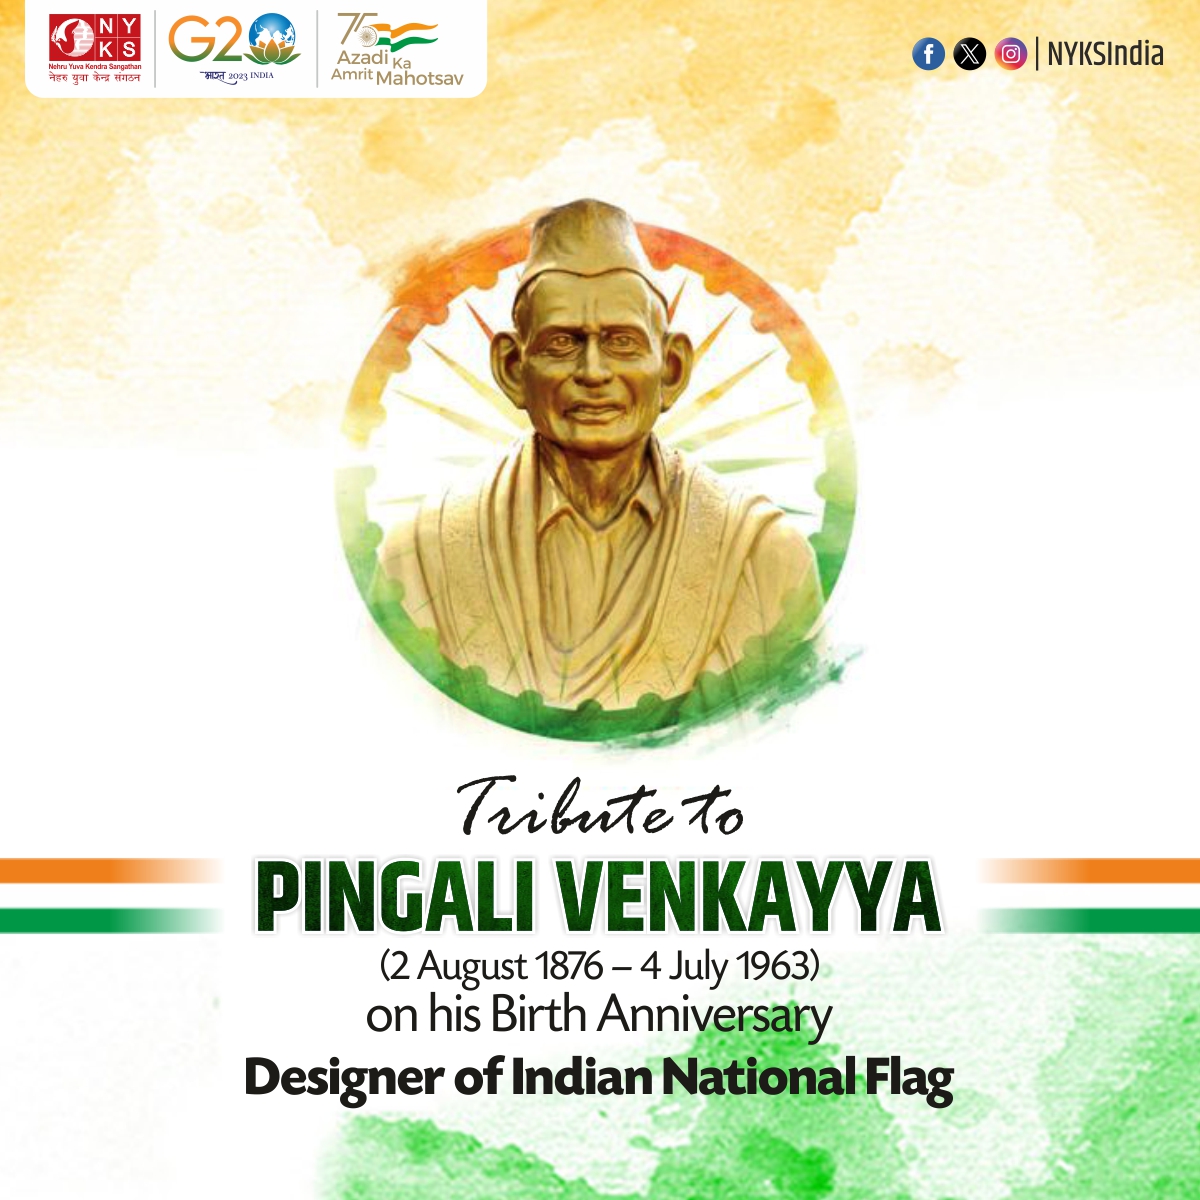 Tributes to Pingali Venkayya Garu on his Jayanthi.

The freedom fighter who was the designer of our Indian National Flag 'TIRANGA'.
It's time to remember and pay homage to these unrecognised names. 

#PingaliVenkayya #IndianFlag #India #NYKS #FreedomFighter #MeriMatiMeraDesh